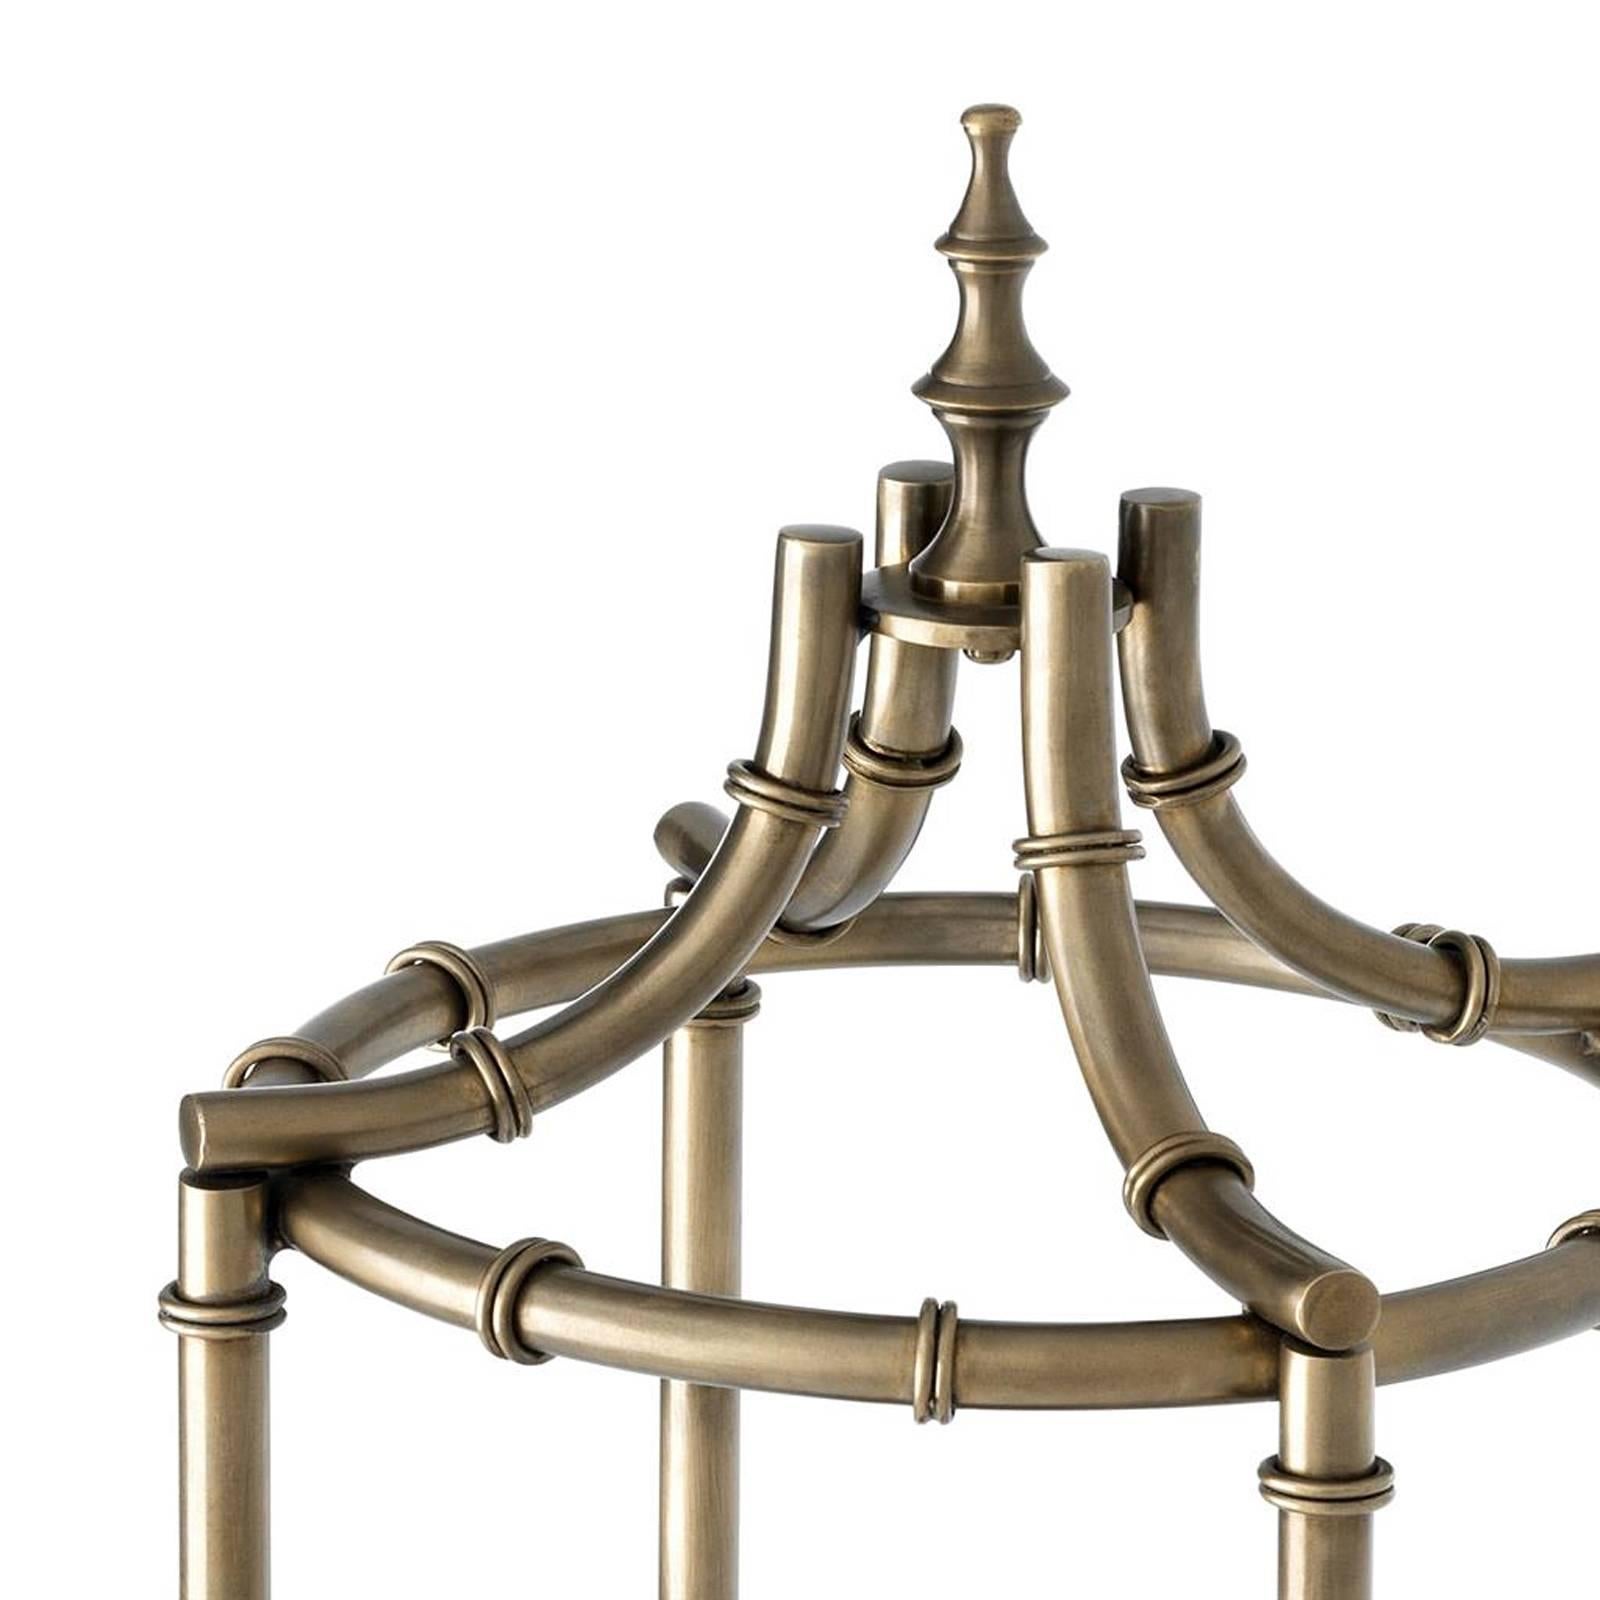 Indian Islands Umbrella Stand in Vintage Brass or Stainless Steel Finish